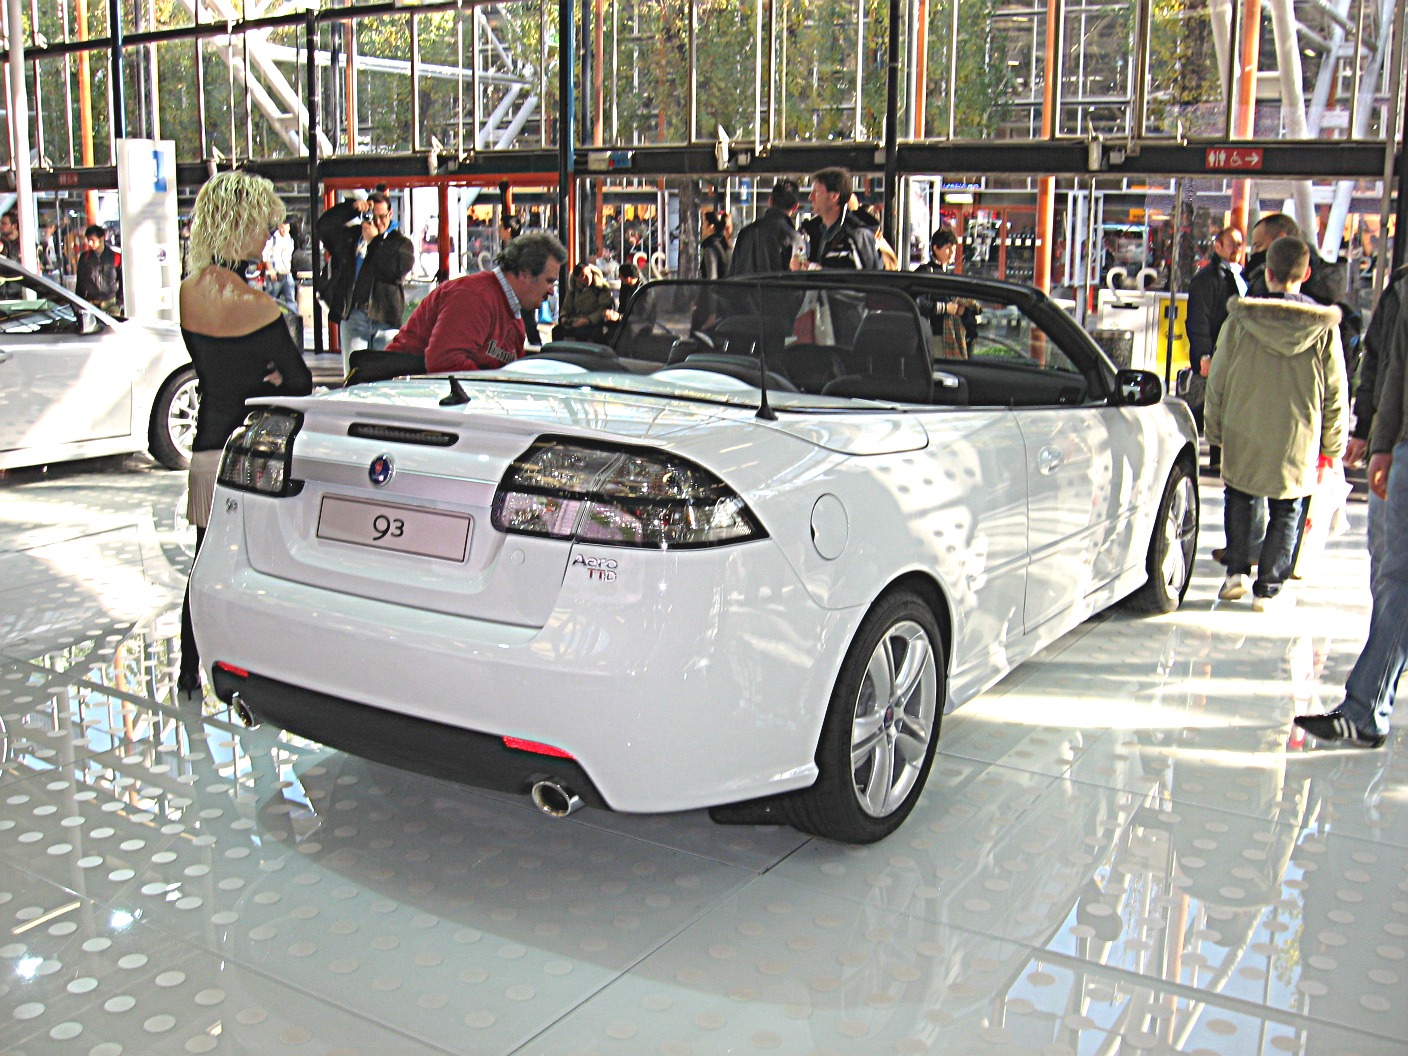 Dossier: Saab 9-3 - Cabriolet MY08 Vue arrière.JPG - Wikimedia Commons